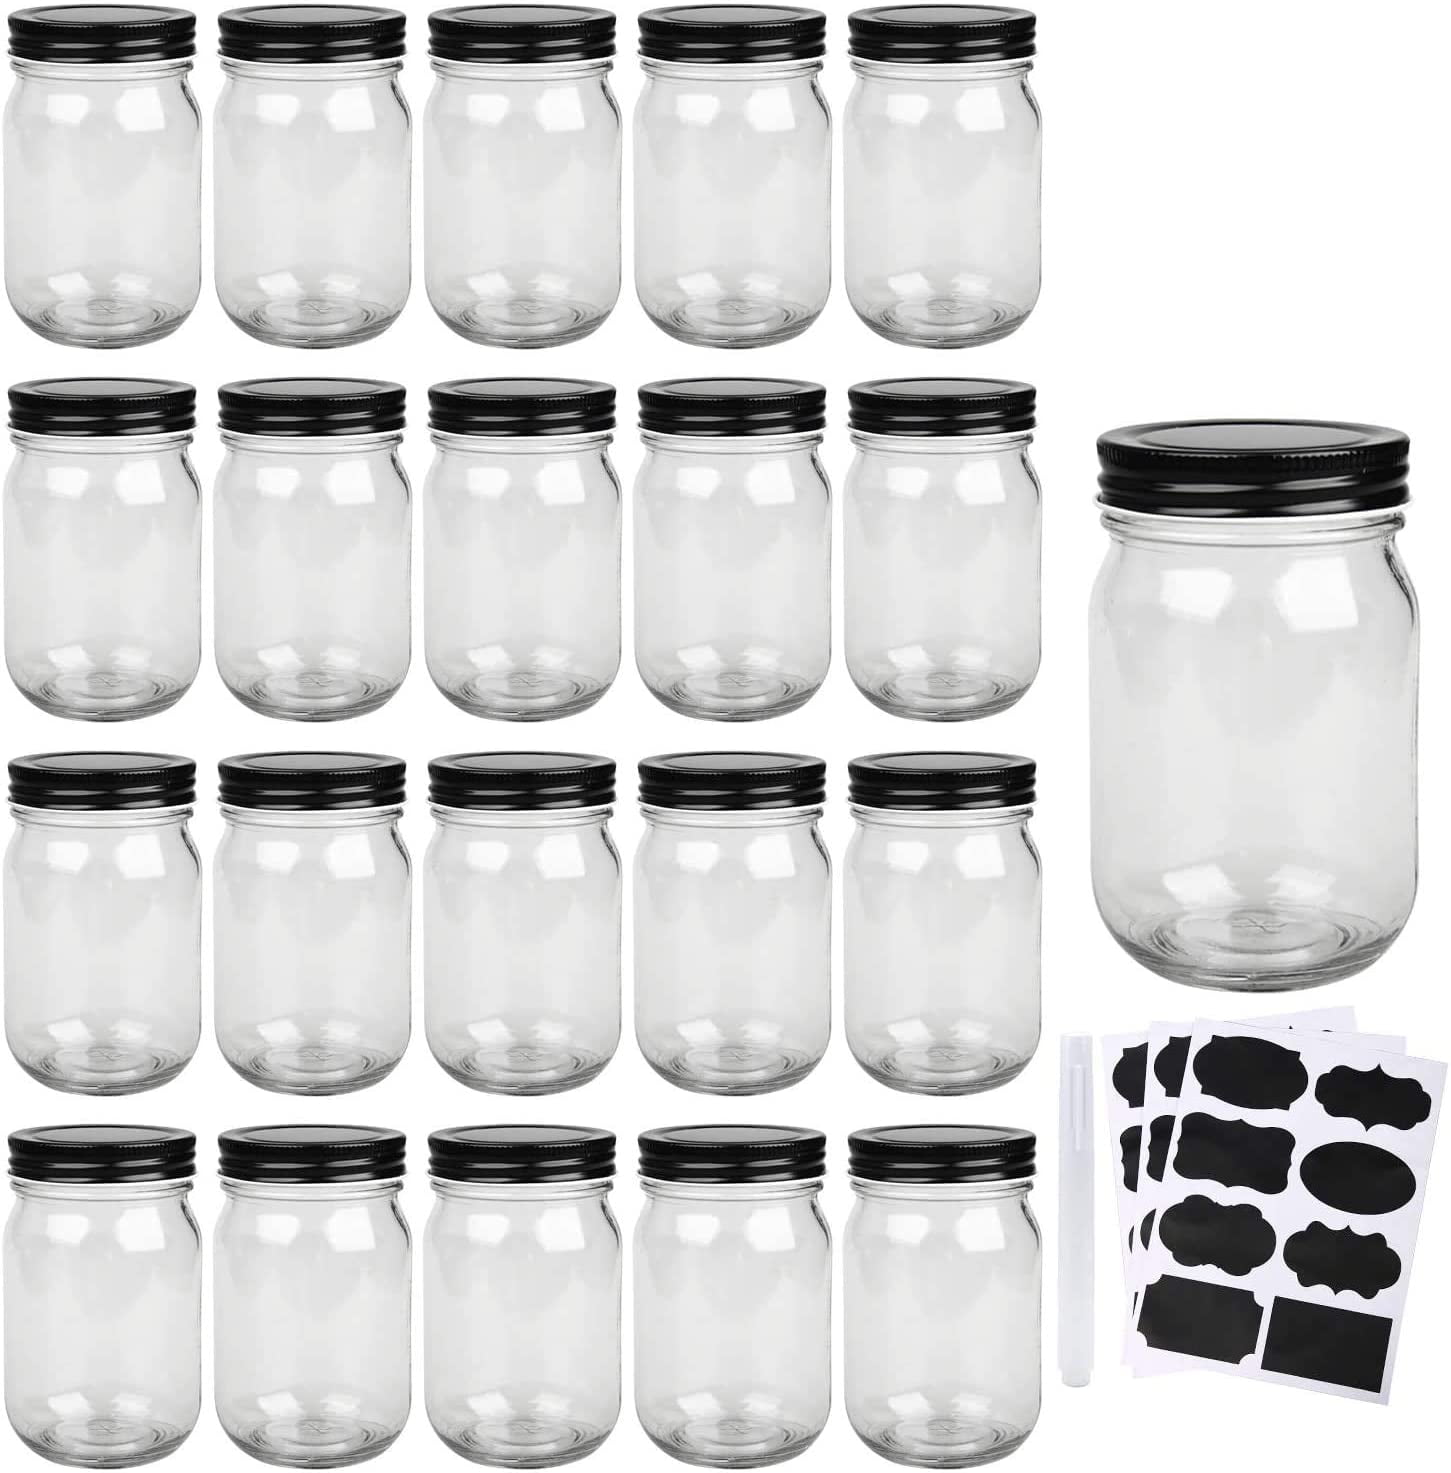 Overnight Oats Mason Jars For Pickles And Kitchen Storage Glass Jars With Lids 12 oz Jelly Canning Jars Regular Mouth Spice Jars With Silver Lids For Drinking Salads Dry Food Yogurt- set 16 Pack With 20 Labels Spices 